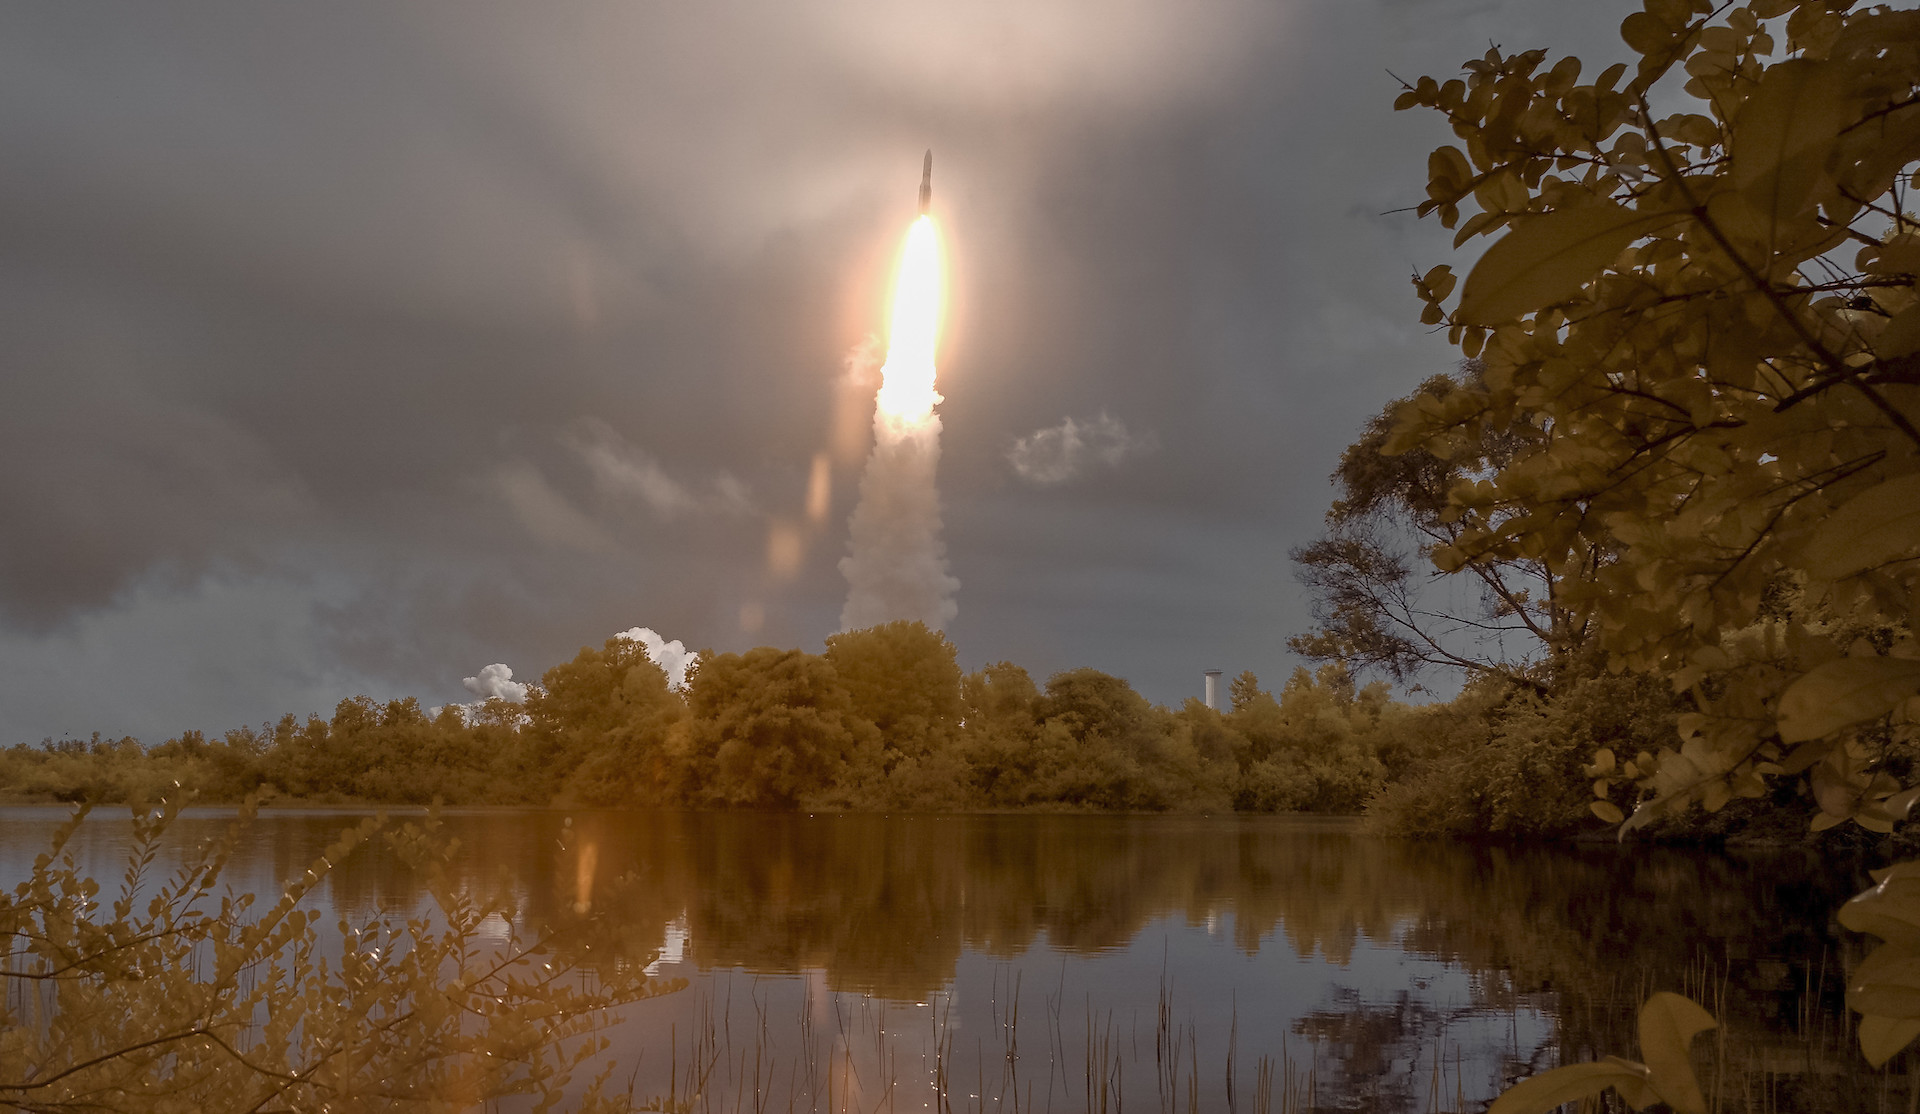 Arianespace's Ariane 5 rocket is seen in this false color infrared exposure as it launches with NASA’s James Webb Space Telescope onboard, Saturday, Dec. 25, 2021, from the ELA-3 Launch Zone of Europe’s Spaceport at the Guiana Space Centre in Kourou, French Guiana.